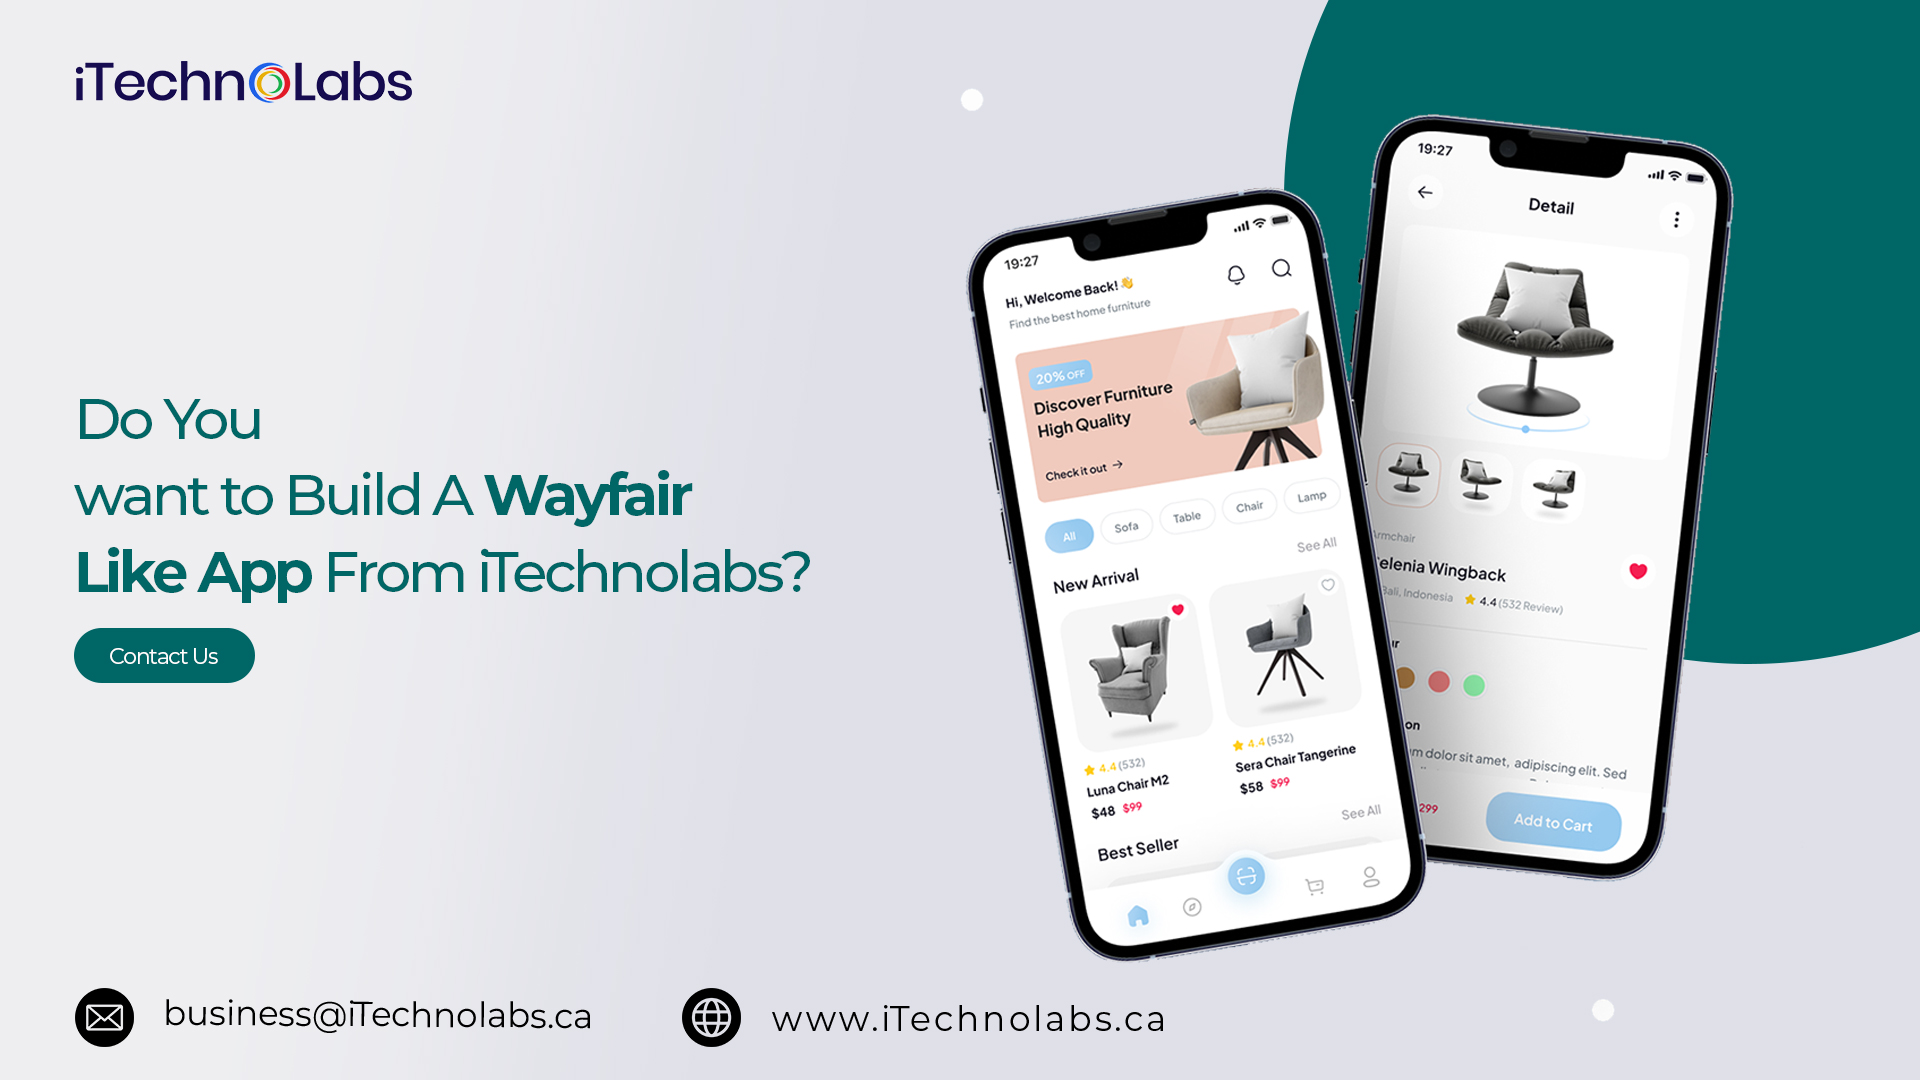 do you want to build a wayfair like app from itechnolabs